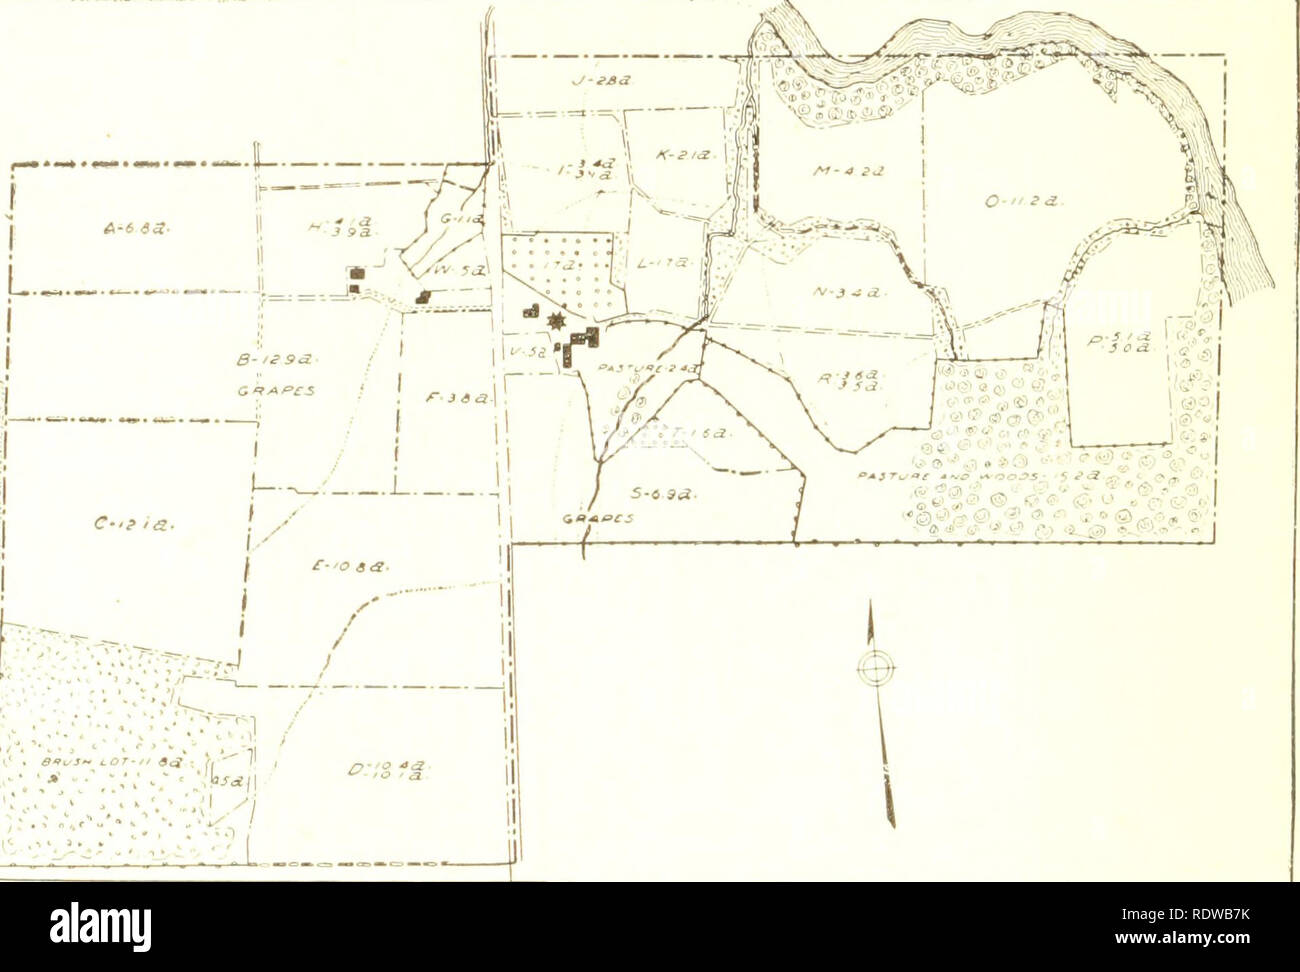 . An economic study of farm layout ... Farm buildings; Agriculture. 454 W. 1. Myers Frequently the possible saving- of land and labor justifies the elimina- tion of these obstructions to cultivation. An improvement of this kind is shown in figures 115 and 11(3. Plan I in figure 115 shows the laj^out of 50 acres which form part of a farm of 160 acres. The open ditch shown in this plan divided this area, as indicated, into irregular fields. With all. 1 -. ^, -T;. y / j i Â«.â , .1,7 Â»*â â¢e ' :â¢' â ;' -^i â'Â» â¢V / '. â¢'1 Fig. 113. a westeen new york farm having many fields of irregular sha Stock Photo